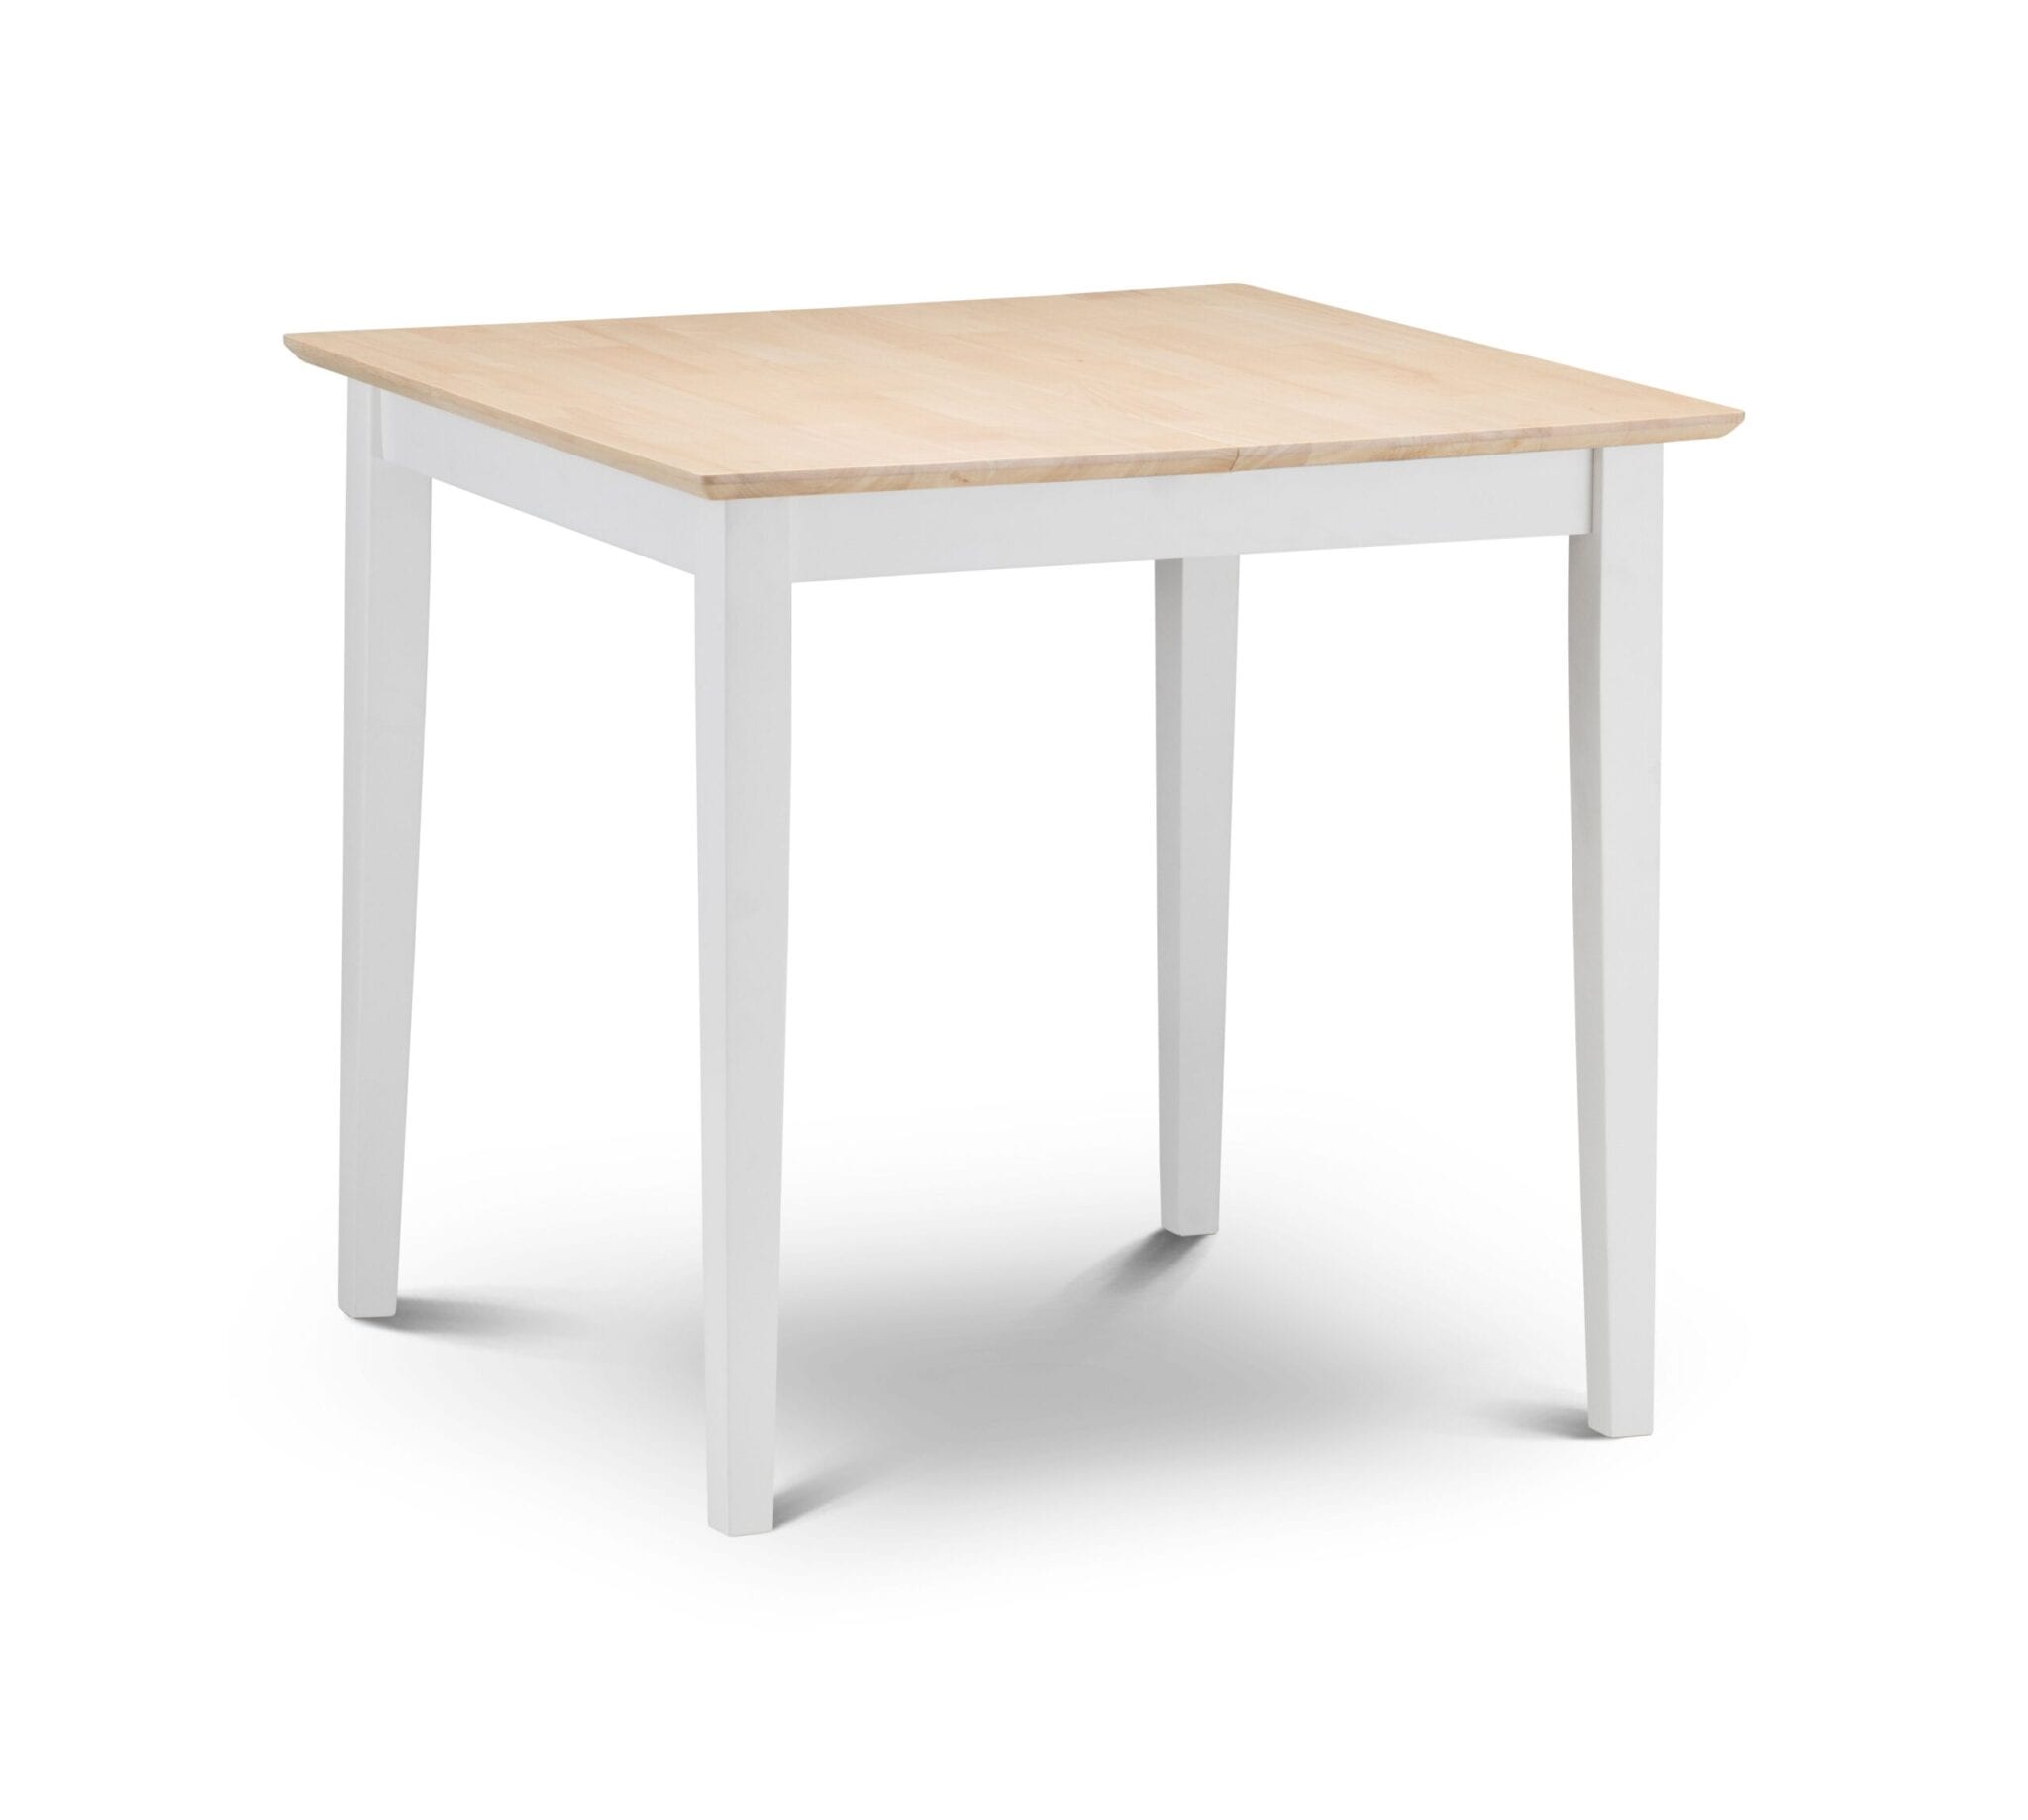 Trafford 80-120cm Extendable Table